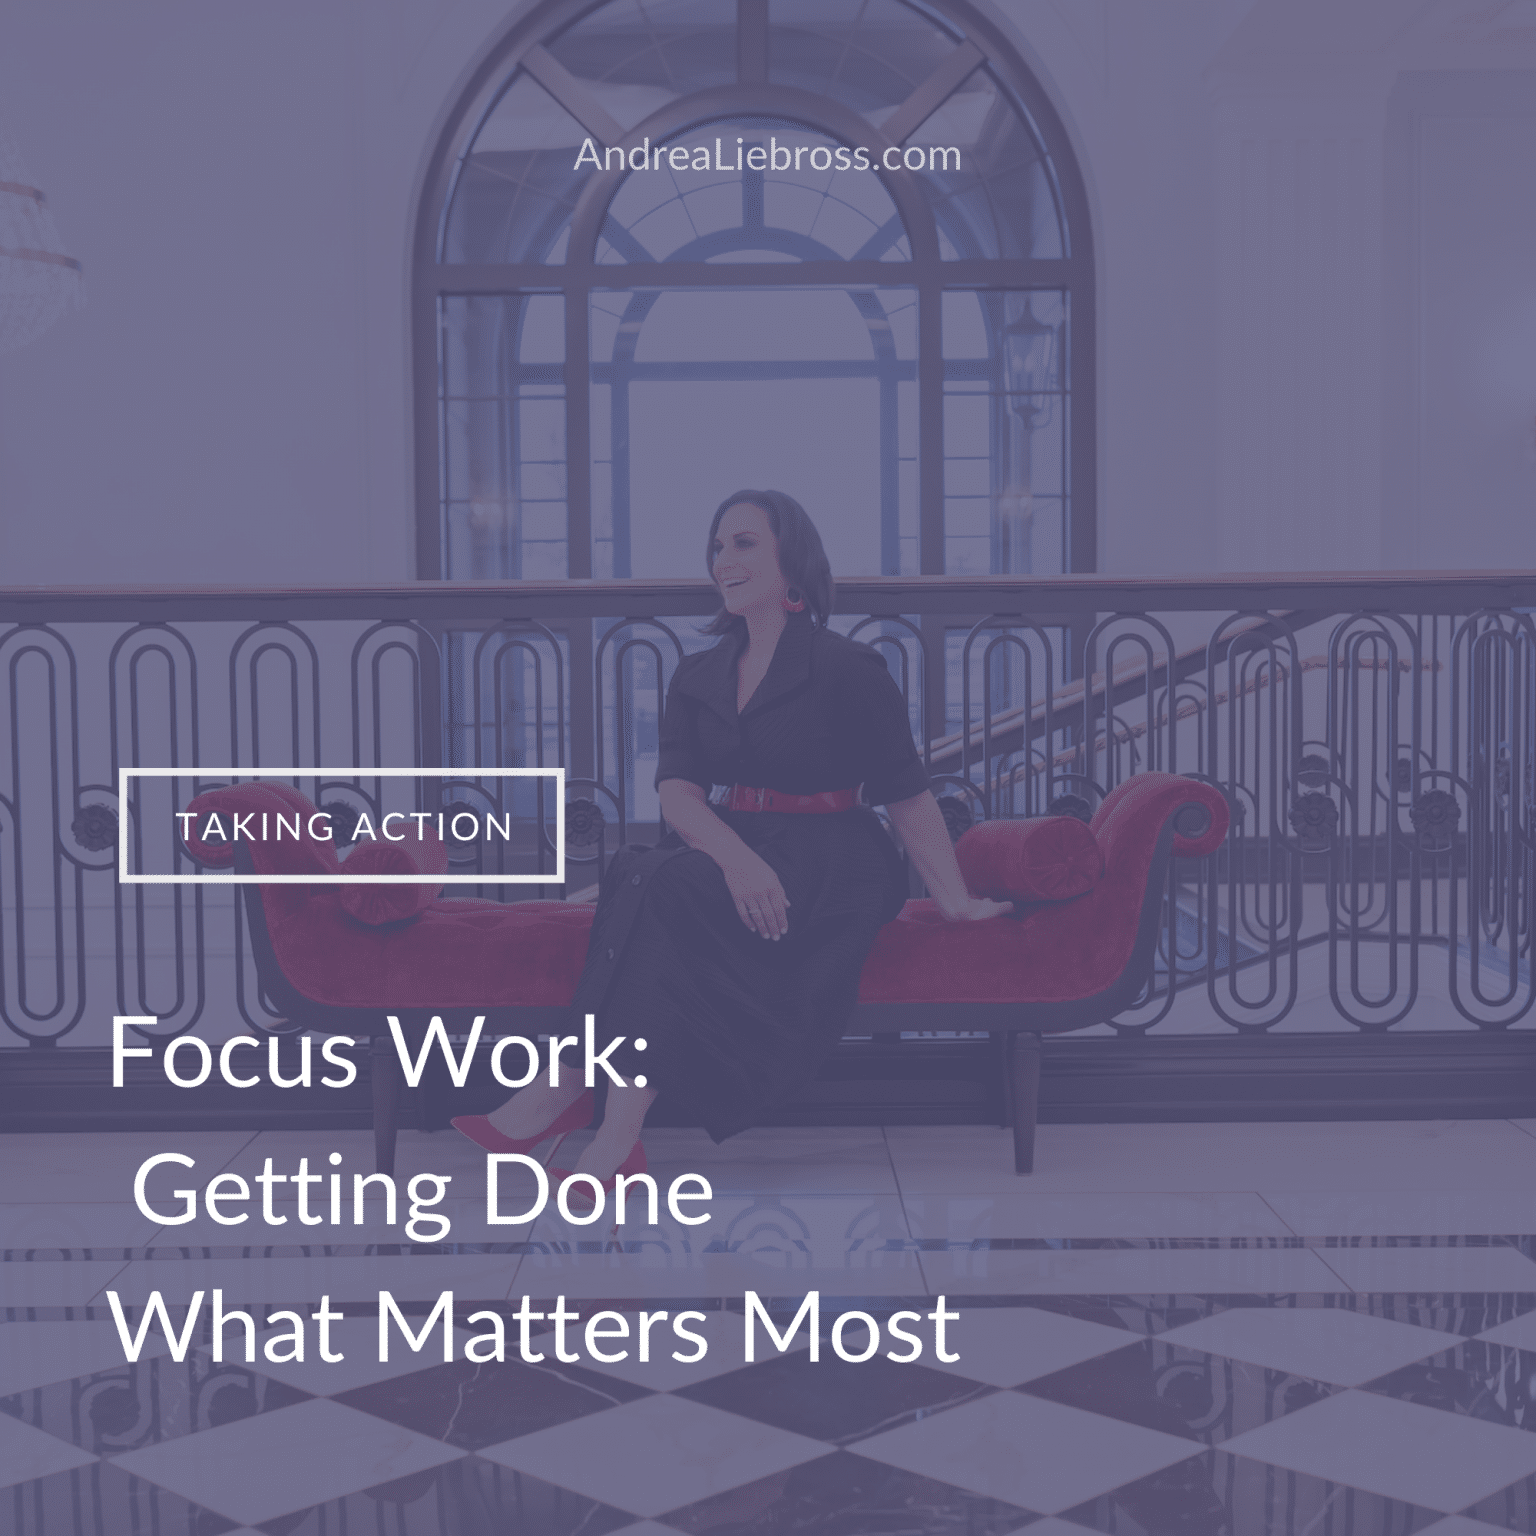 How to Get Done What Matters Most